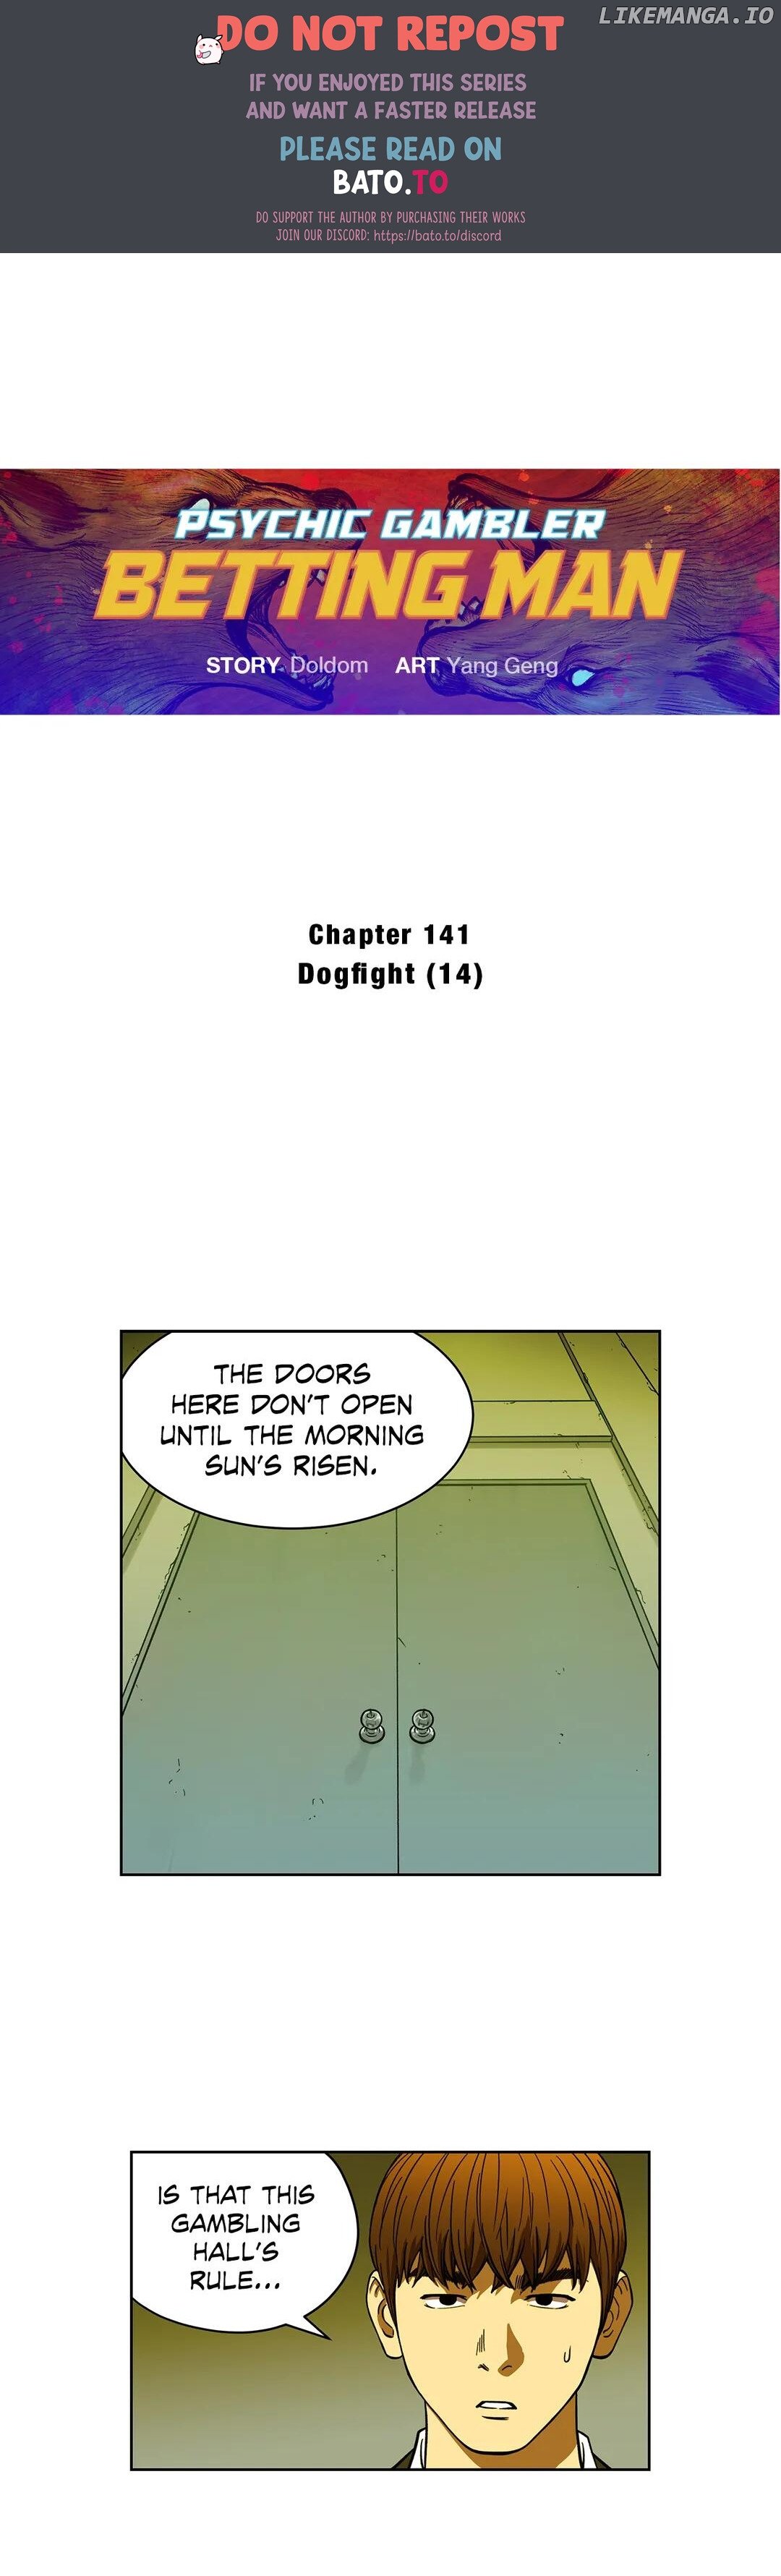 Psychic Gambler: Betting Man chapter 141 - page 1